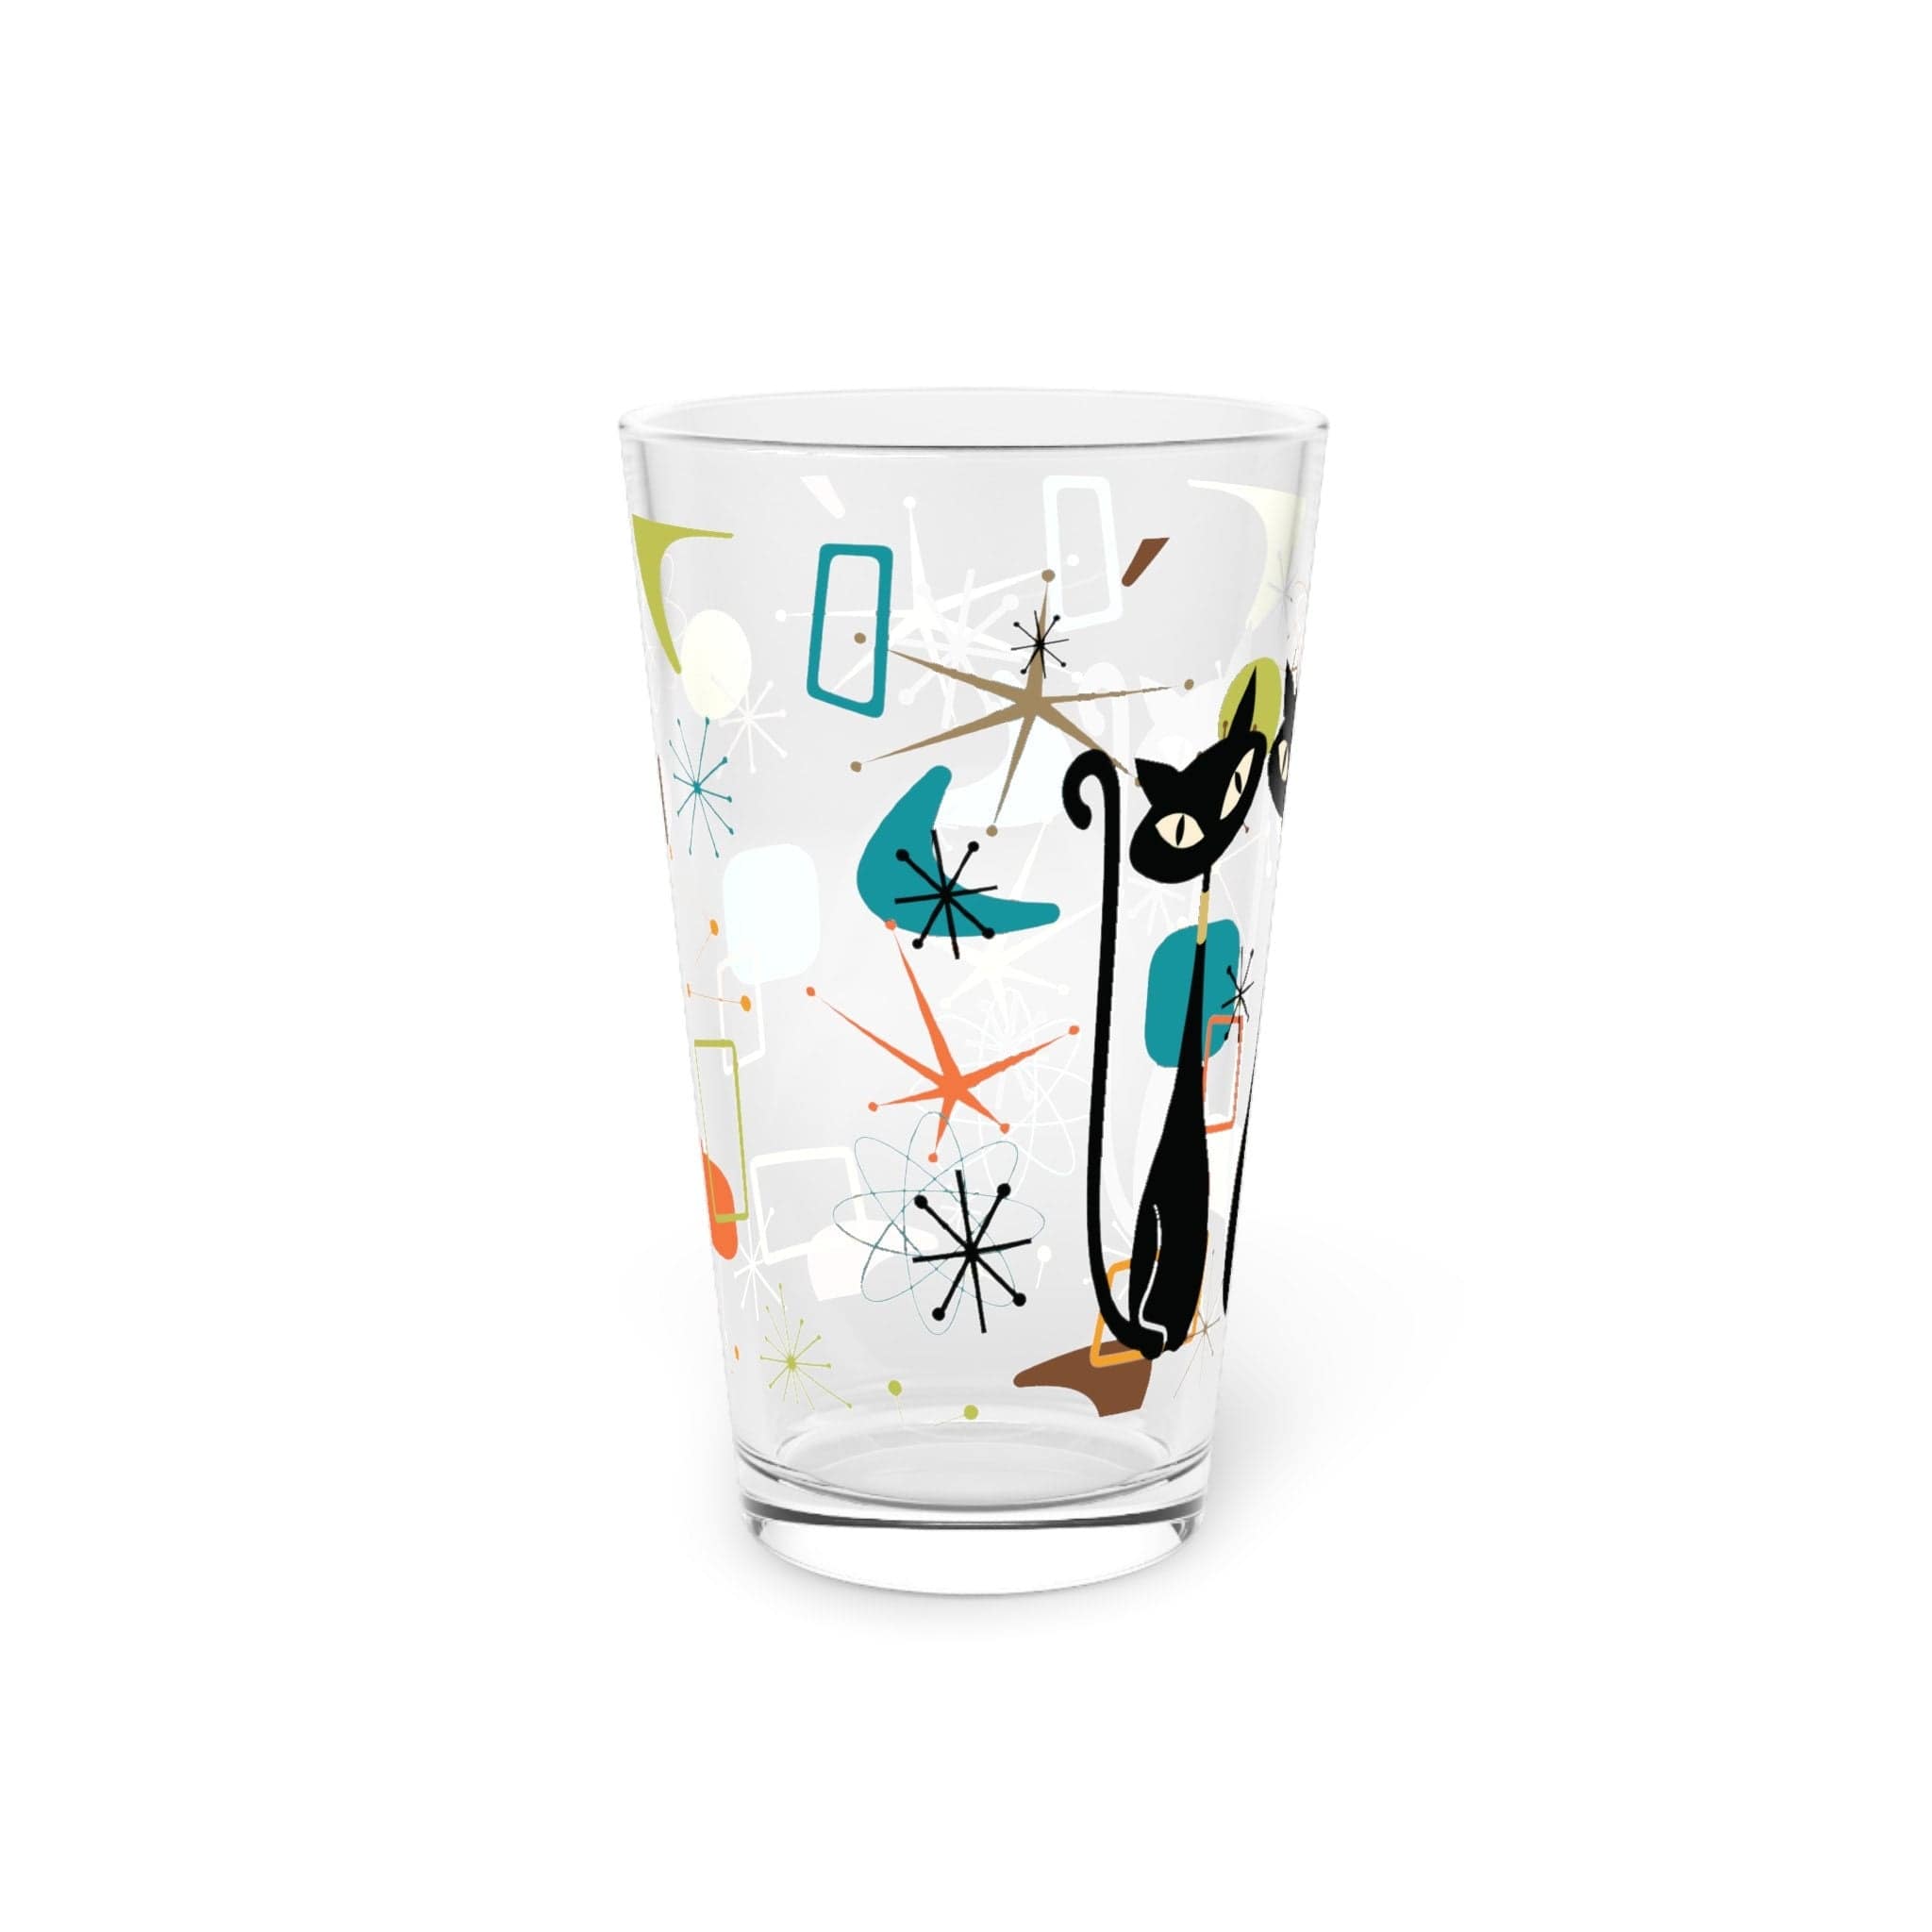 Kate McEnroe New York Atomic Kitschy Black Cat Pint Glass, 16oz Mid Century Modern Retro Beer Glass, MCM Beer Glassware Gifts, Party Drinkware, Cocktail Glass Beer Glasses 19544781790628725125